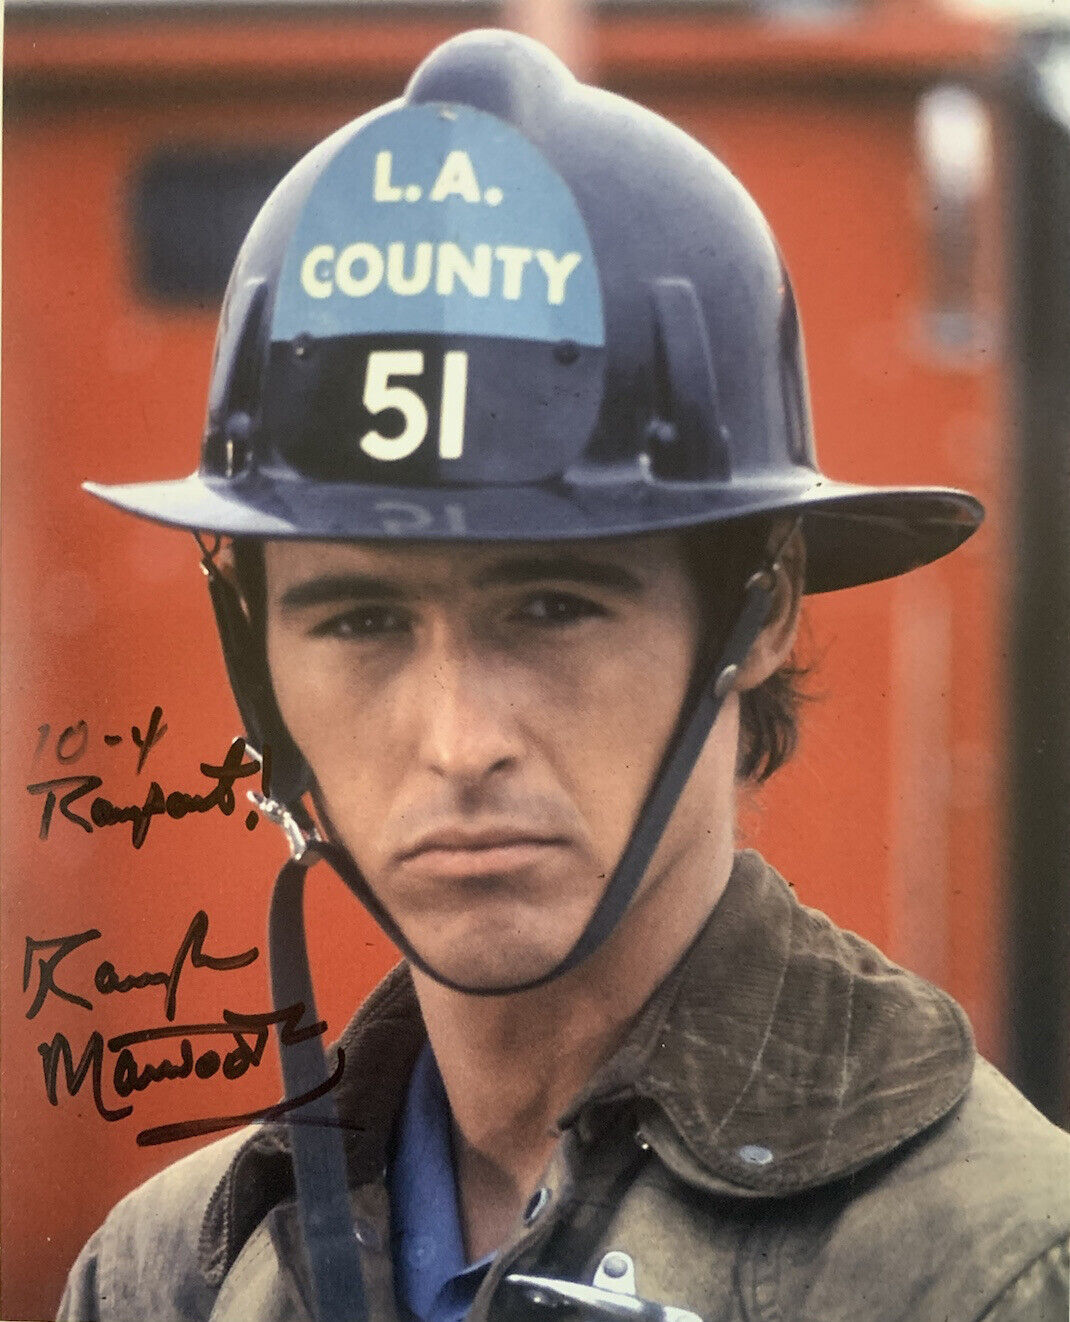 RANDOLPH MANTOOTH HAND SIGNED 8x10 Photo Poster painting EMERGENCY FIREMAN SHOW AUTOGRAPH COA